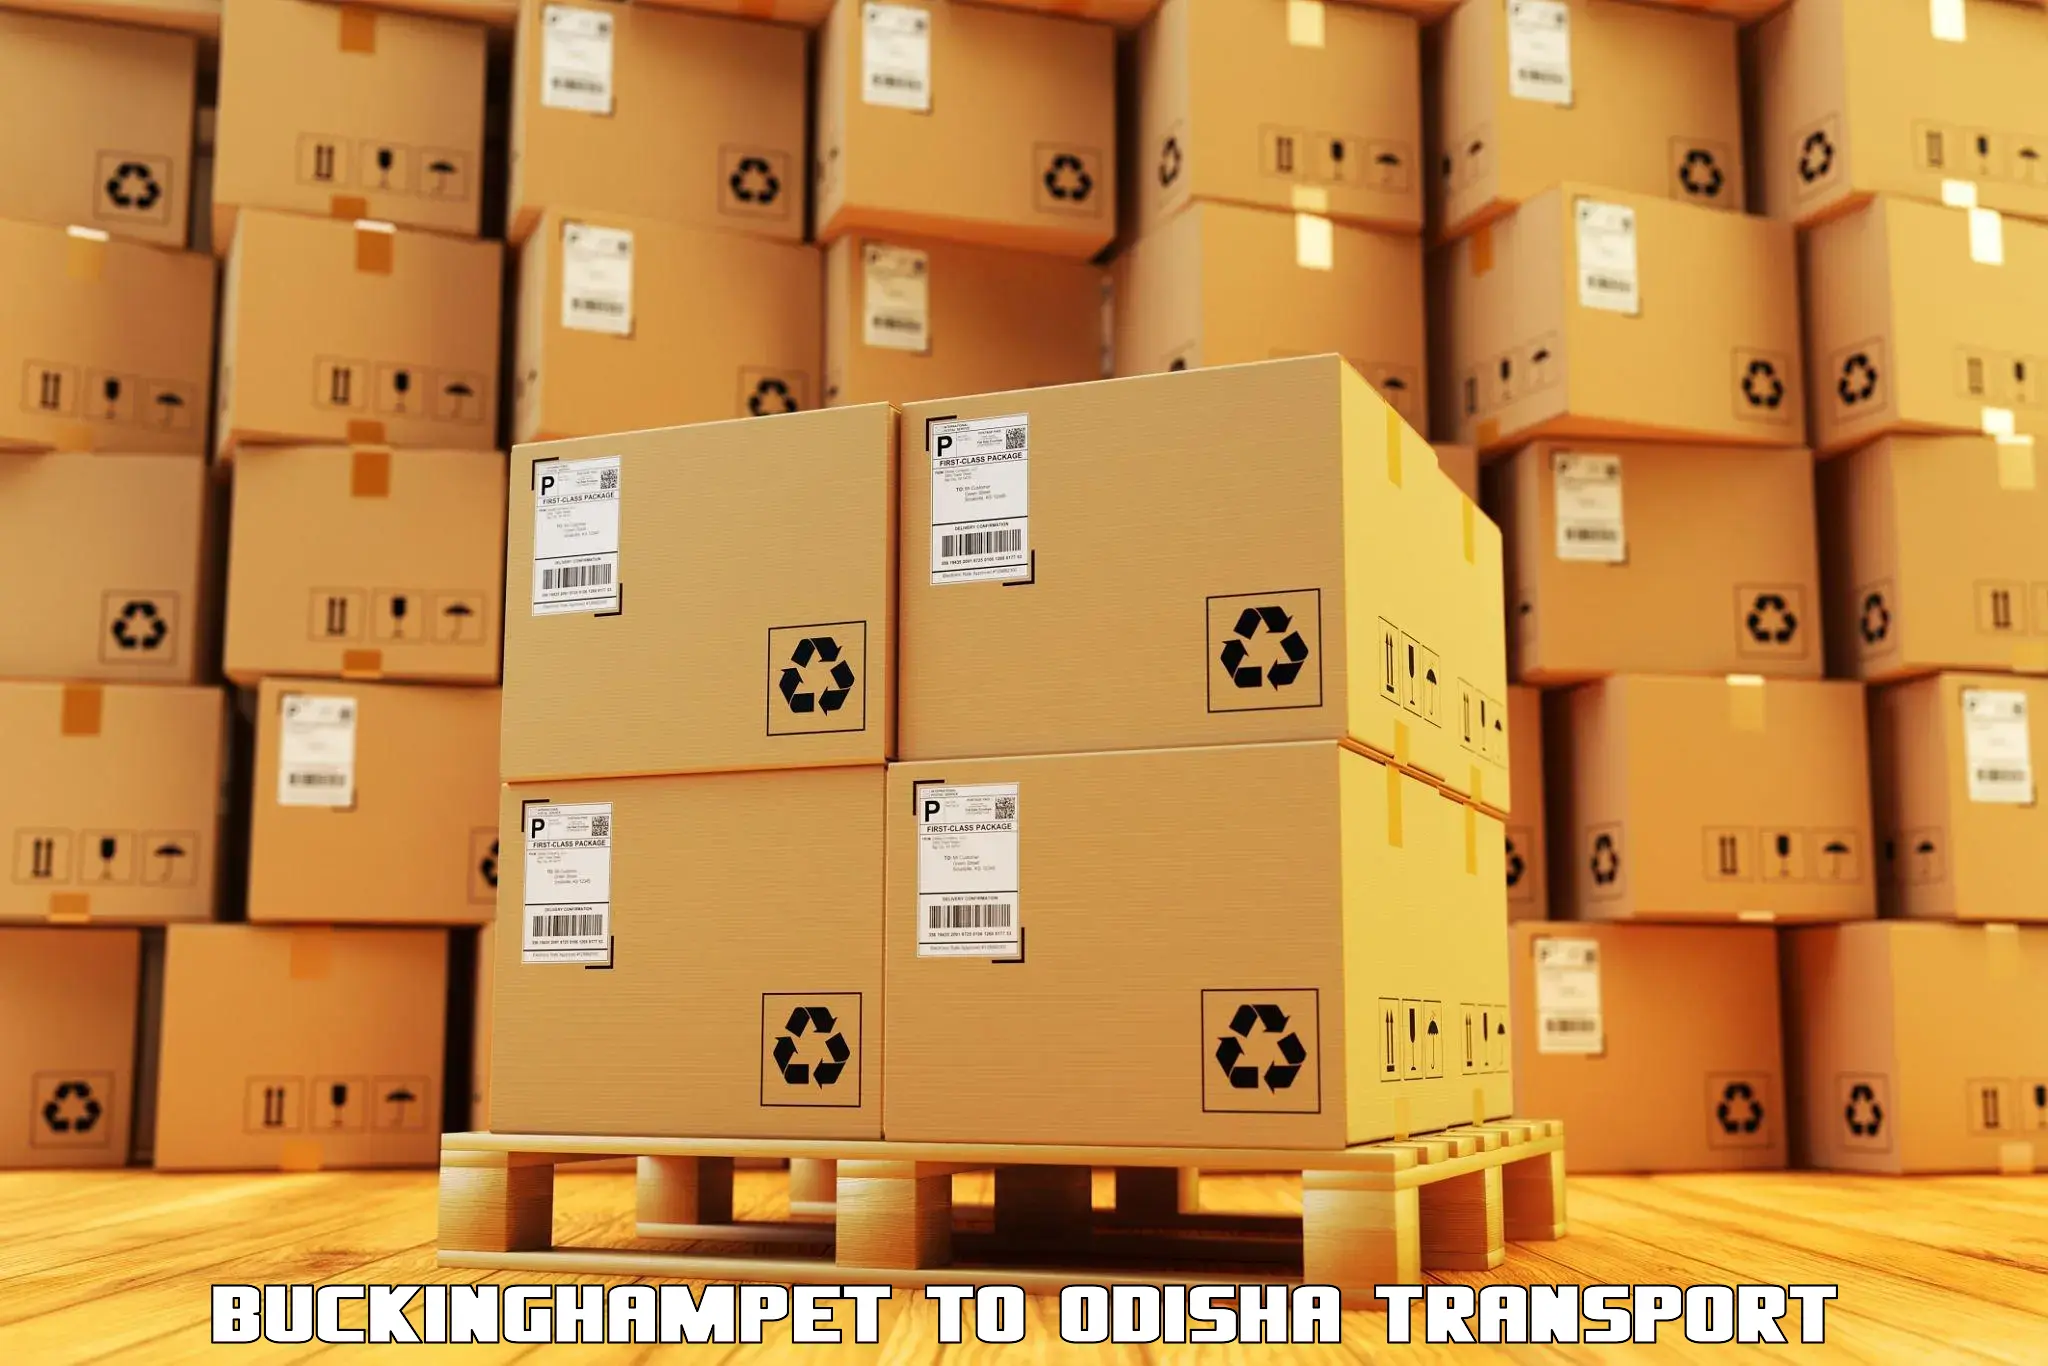 Road transport online services in Buckinghampet to Chandipur